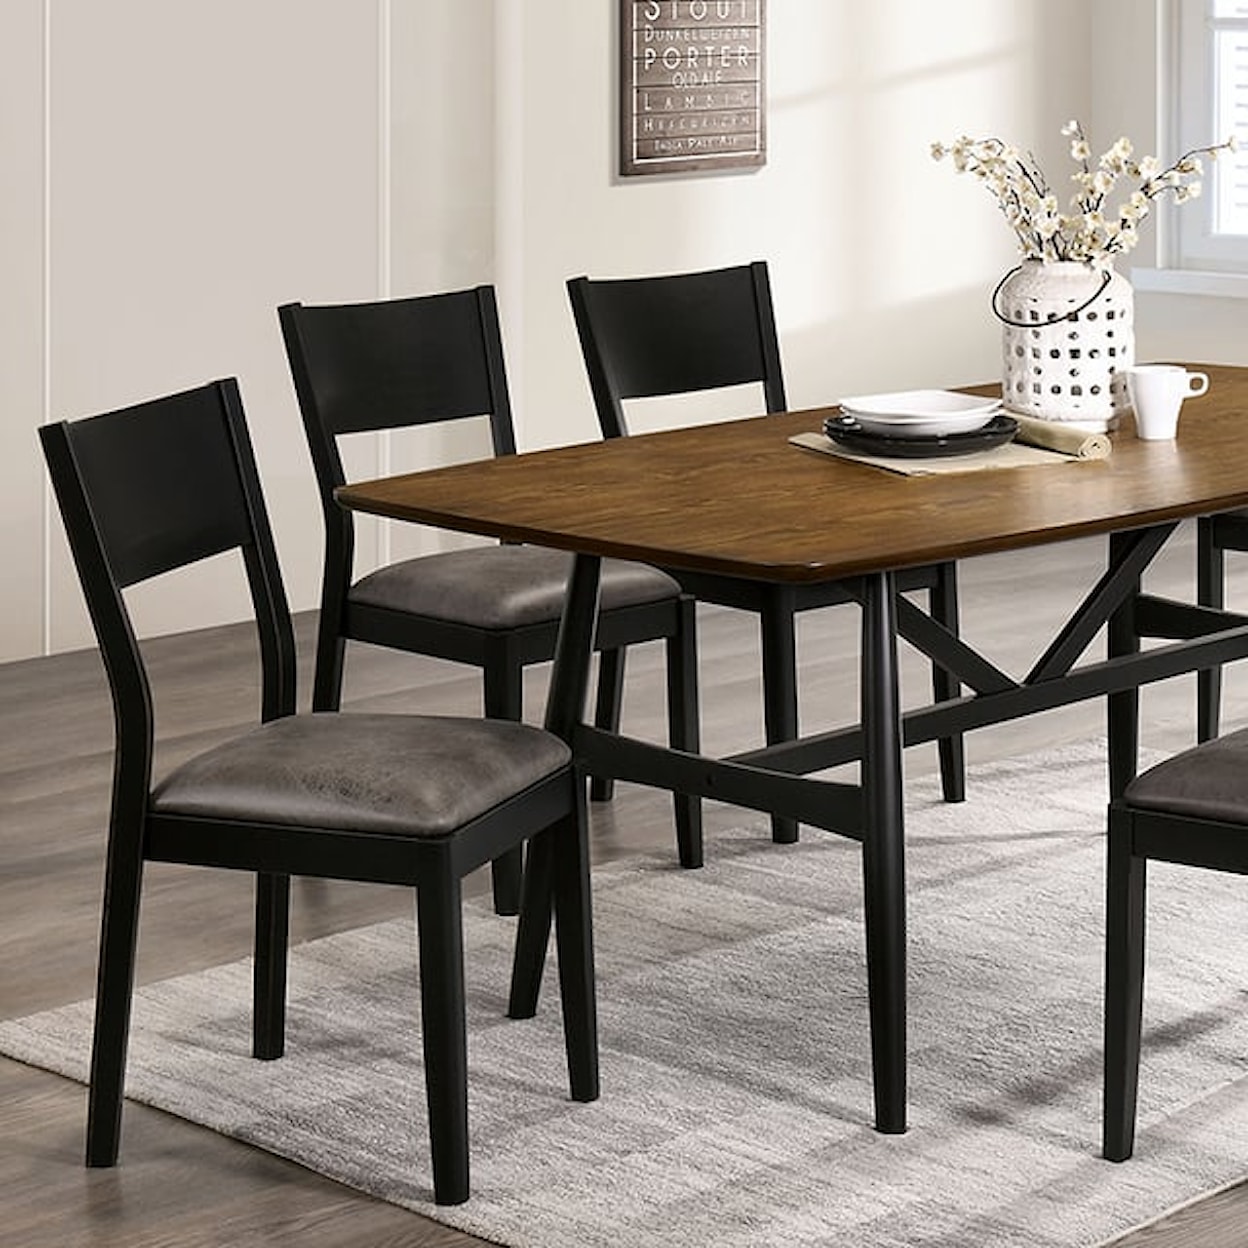 Furniture of America Oberwil 7 Pc. Dining Table Set